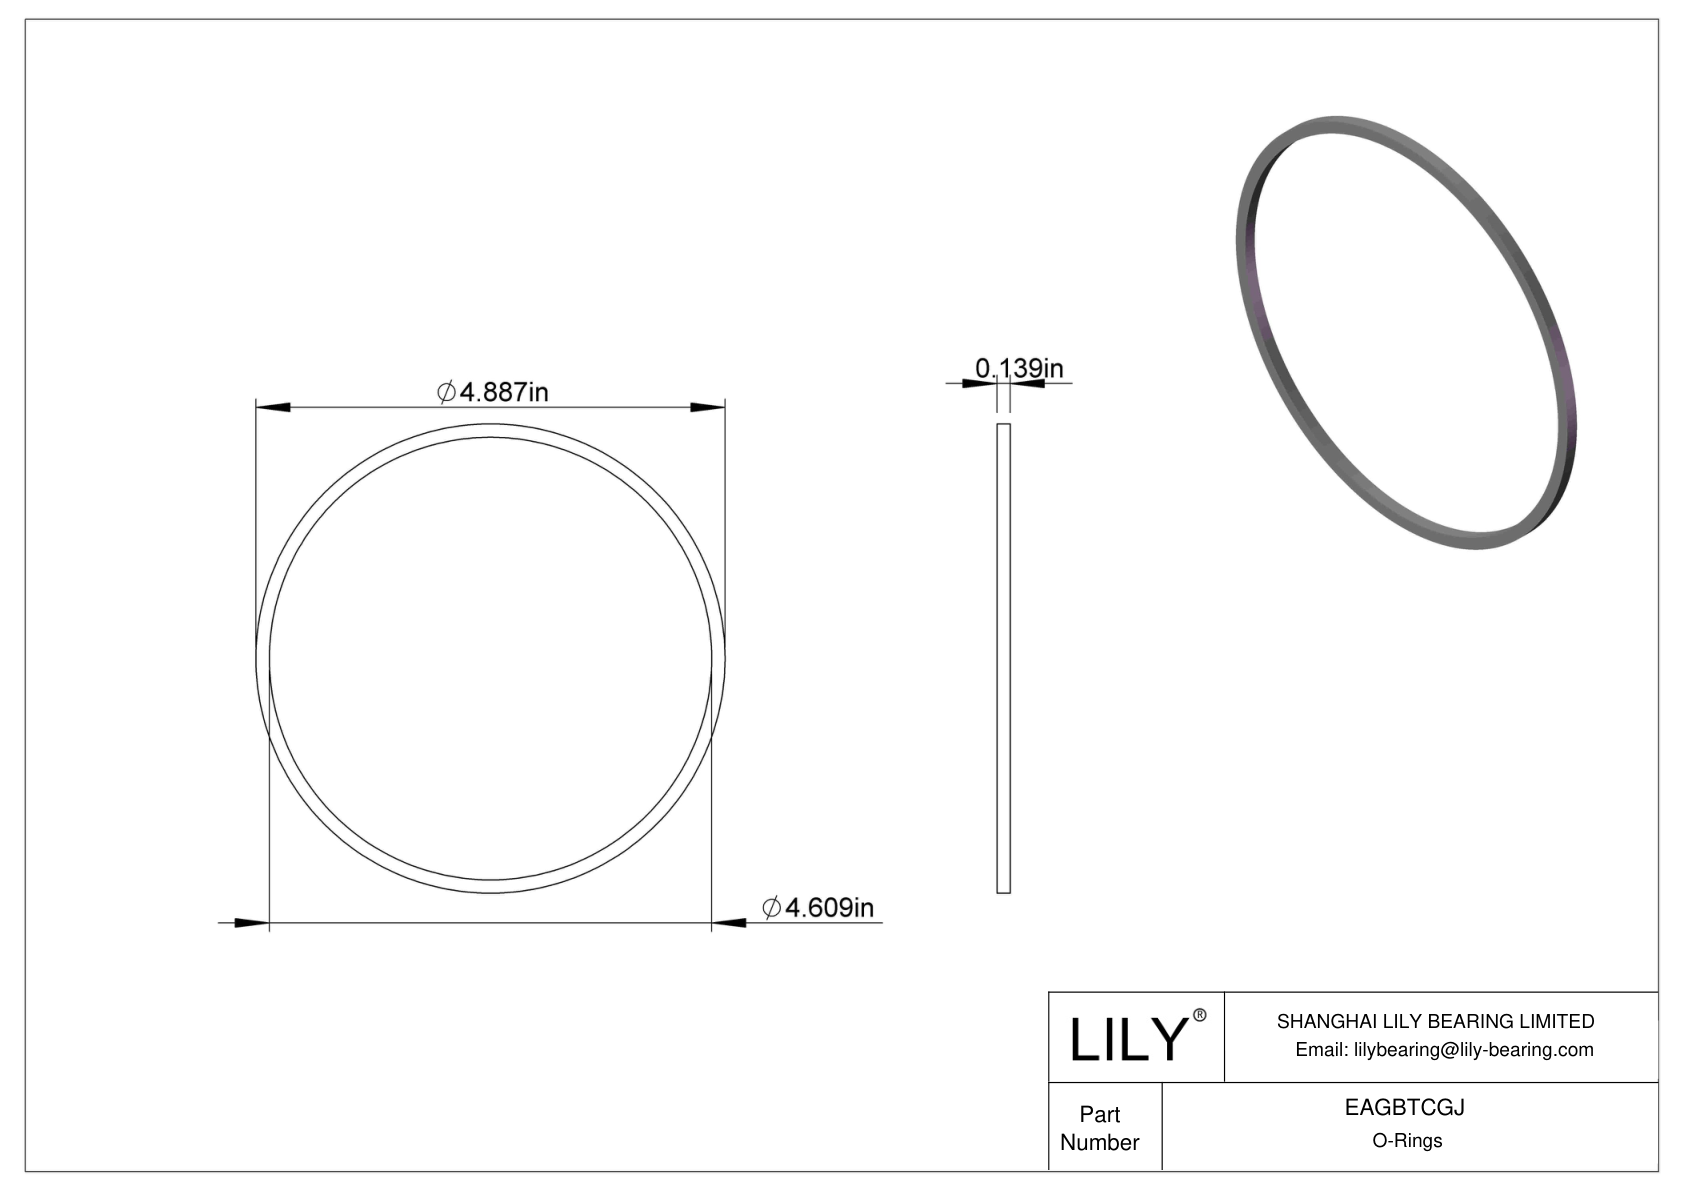 EAGBTCGJ Oil Resistant O-Rings Square cad drawing